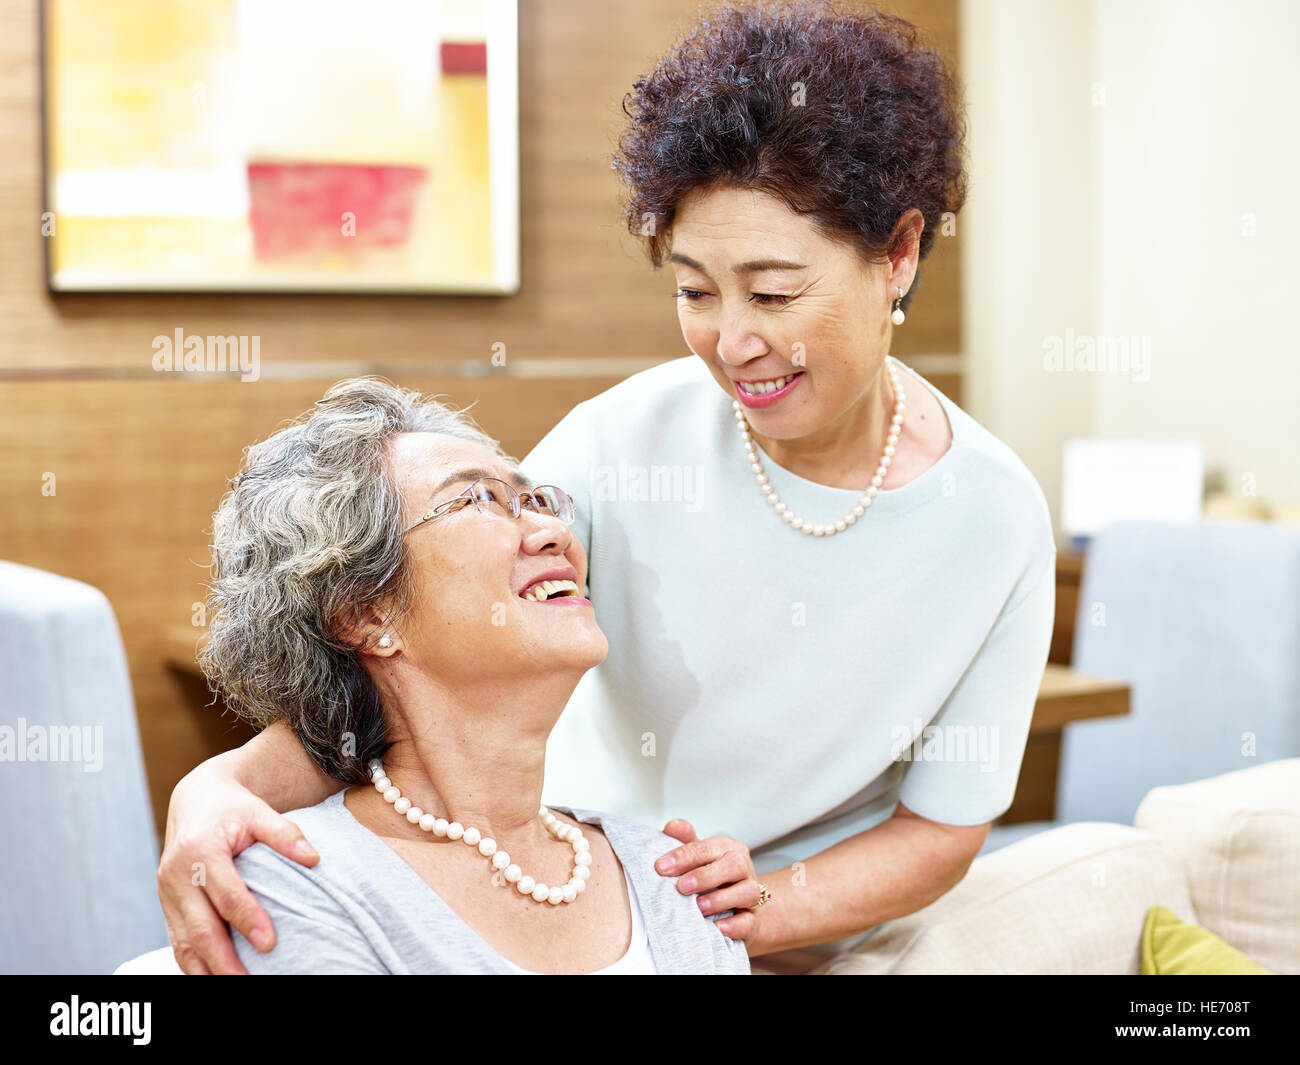 two senior asian women showing care and friendship Stock Photo